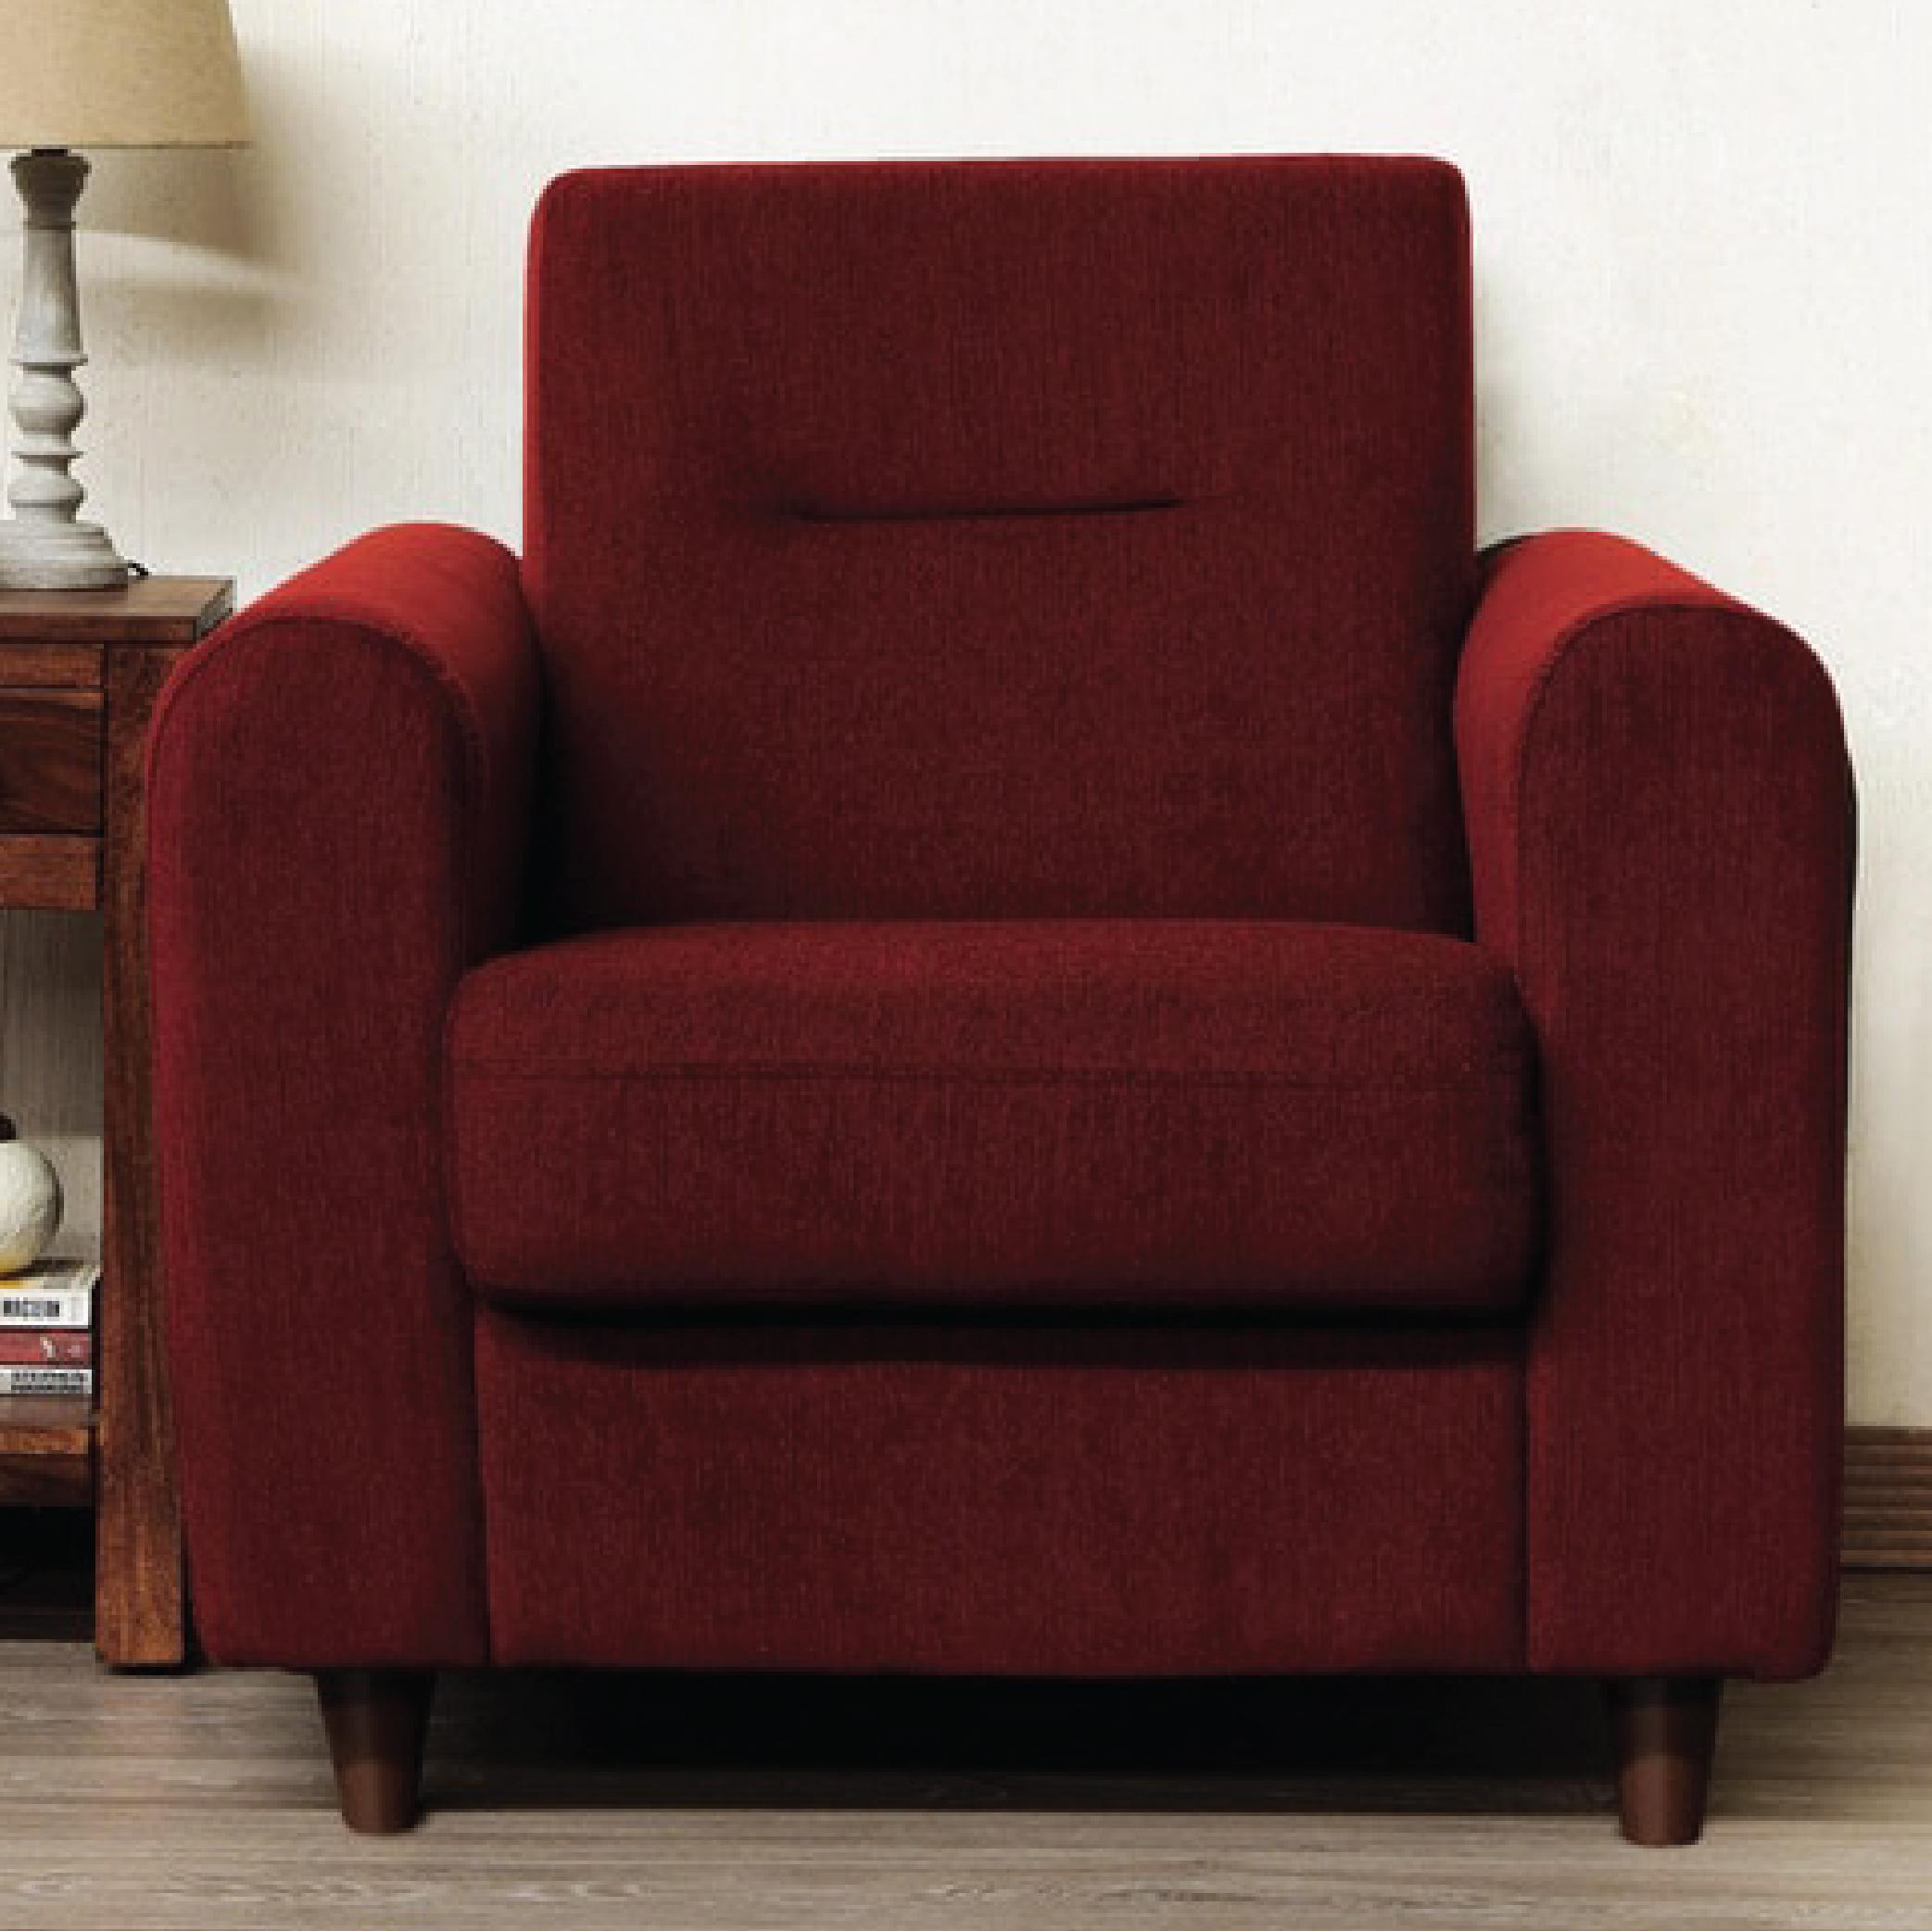 Nola One Seater Sofa in Garnet Red Colour